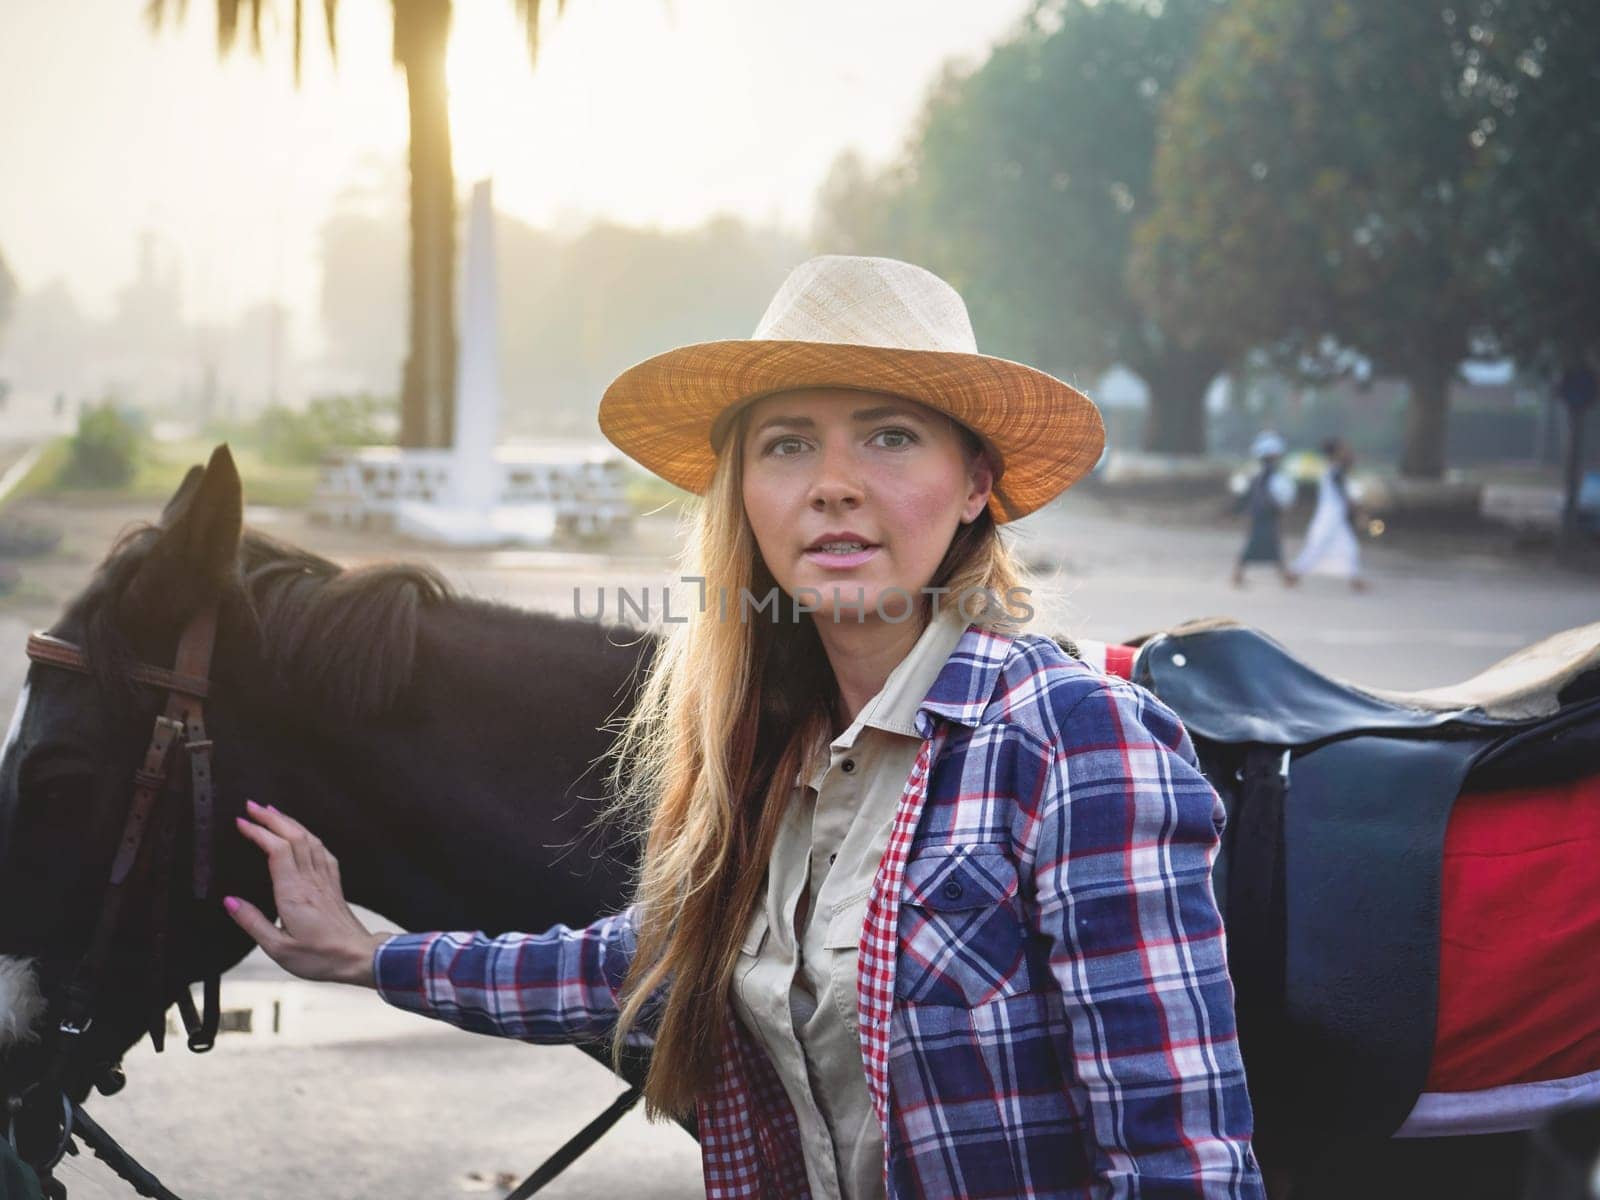 Candid portrait of young woman in stray hat and tartan shirt touching her black horse behind, ready for morning ride, blurred town in background by Ivanko